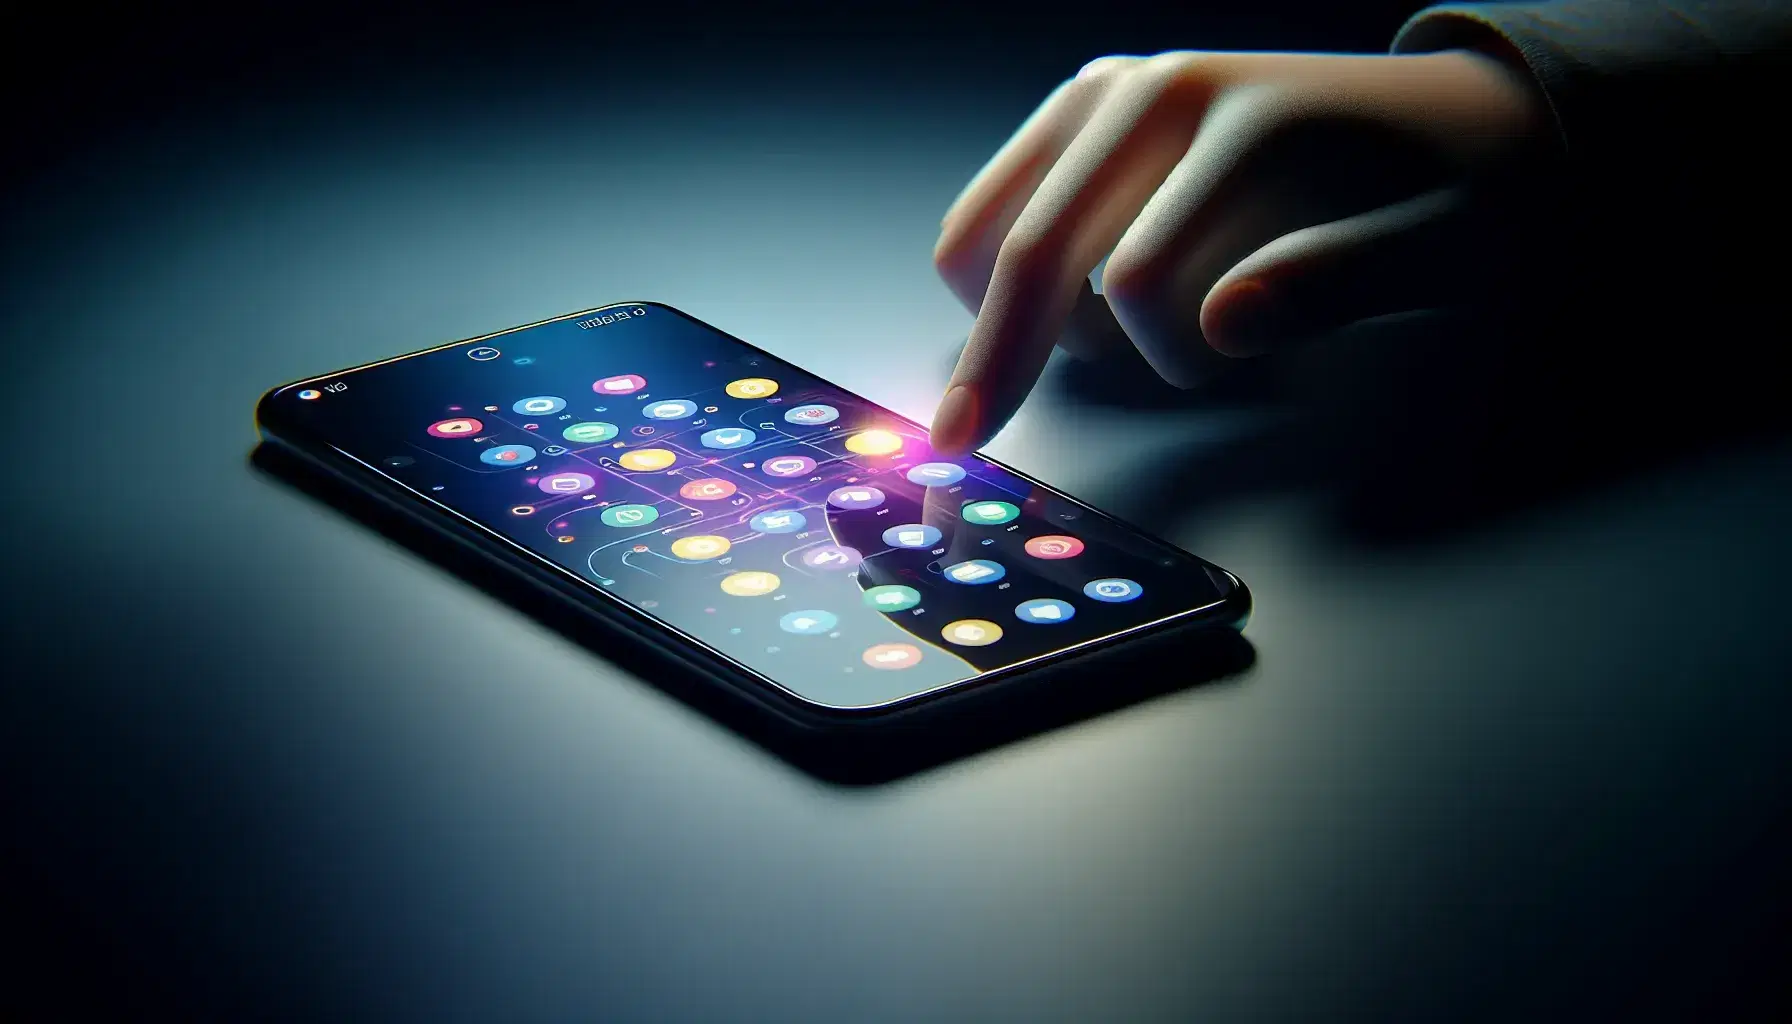 Modern smartphone on dark surface with lit screen showing colorful app icons, hand ready to interact, background with blurred circuits.